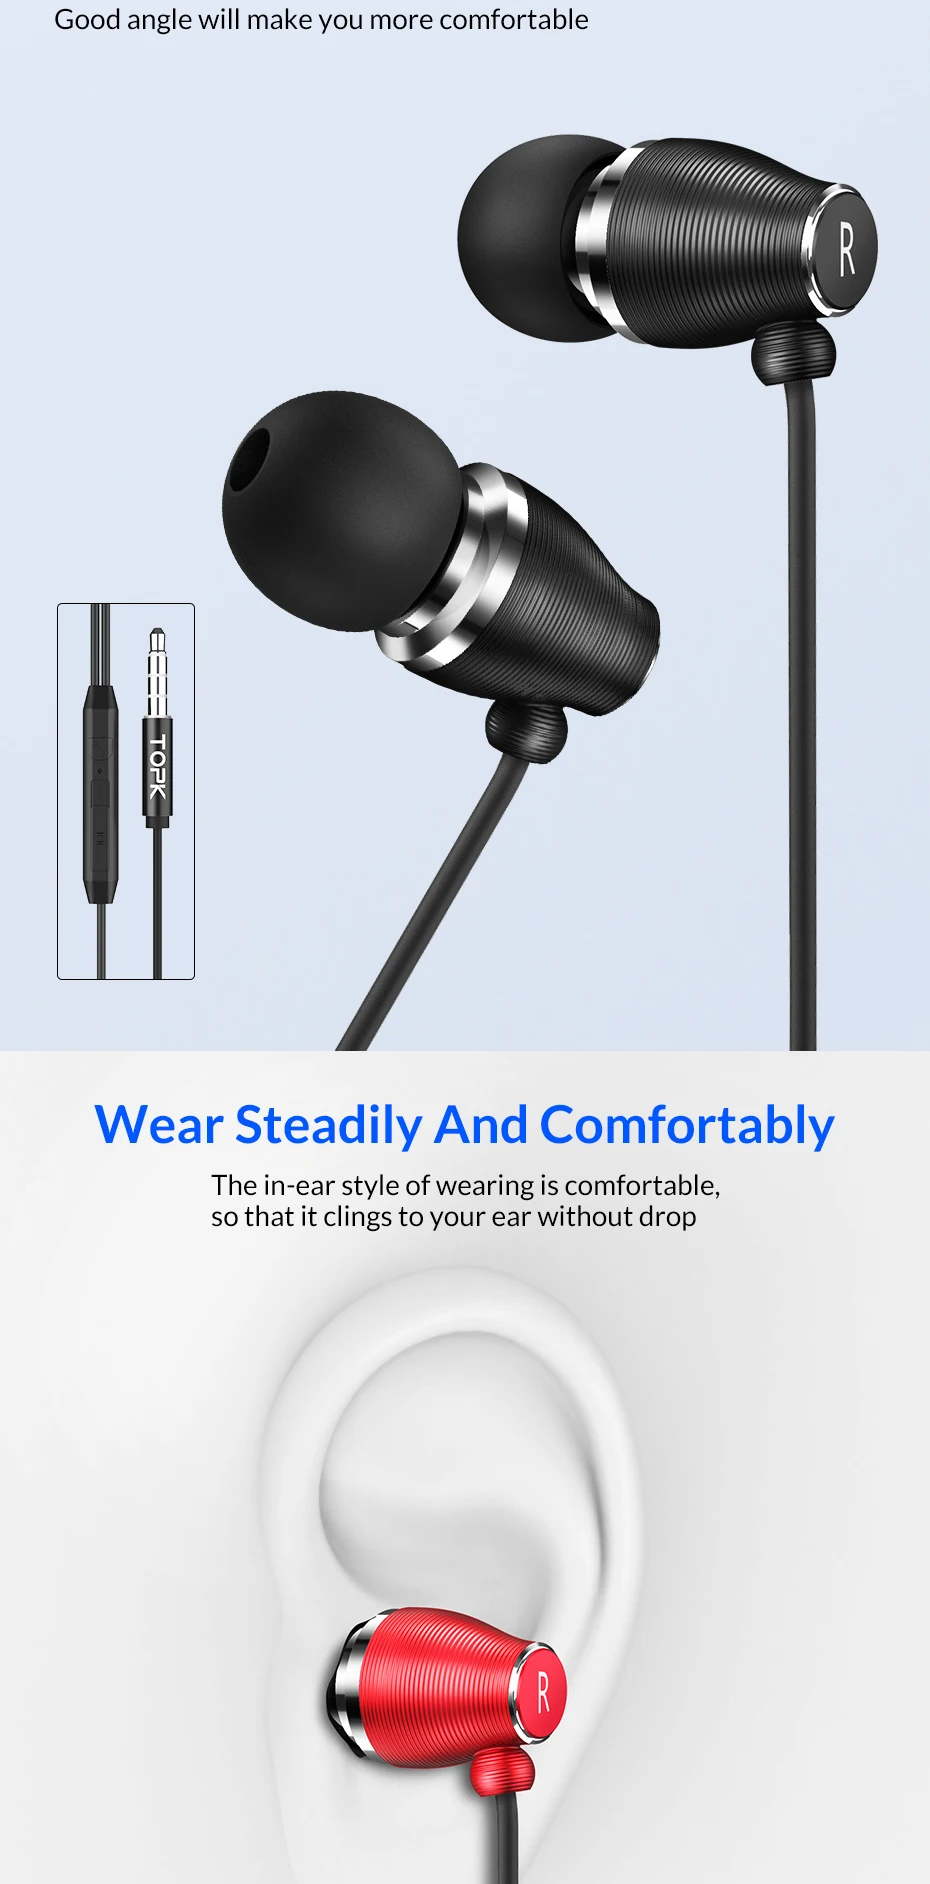 TOPK F07 Stereo Bass Earphone 3.5mm Jack In-ear Sport Wired Earphones with mic for iPhone Xiaomi Samsung Phone Computer Headset